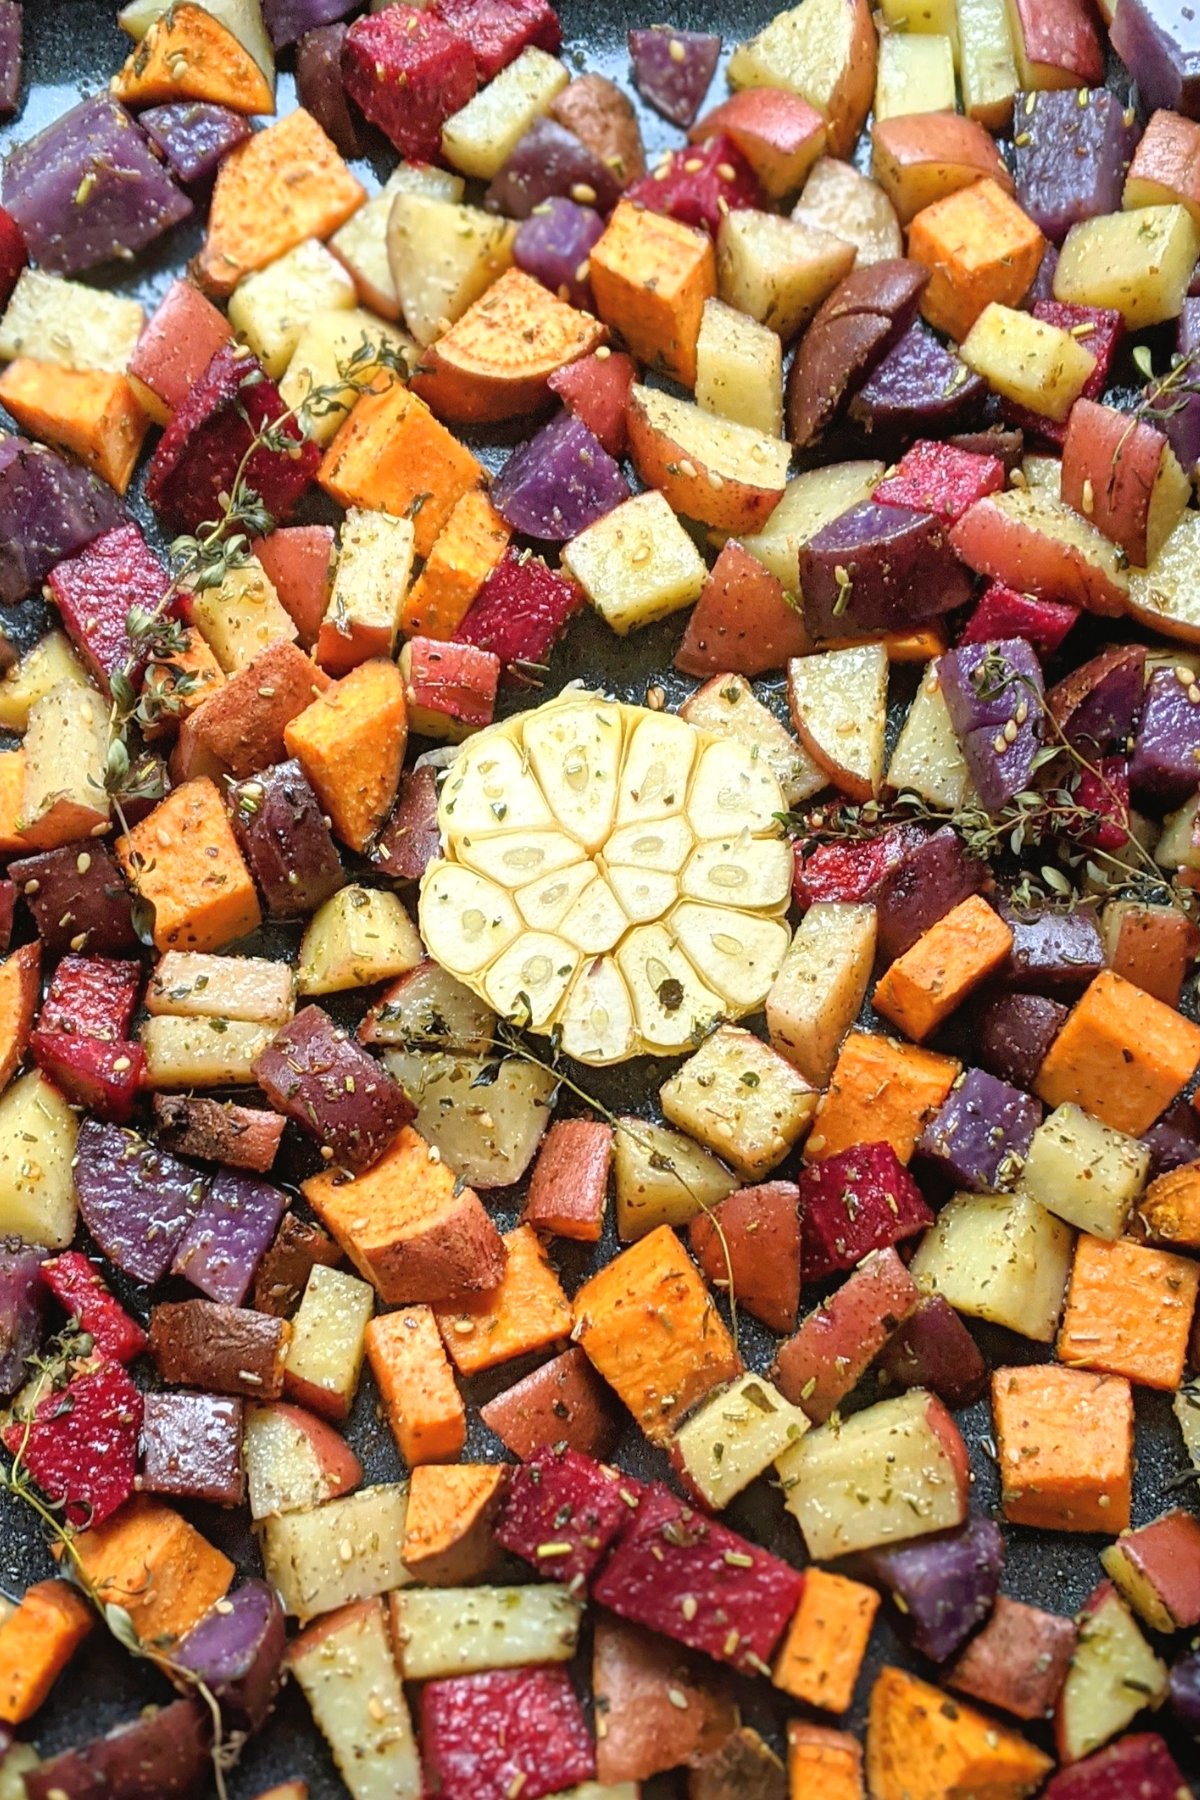 fall roasted vegetables with carrots beets squash potatoes tomatoes roasted garlic olive oil and spices vegan vegetarian dairy free no cheese vegetable recipes fancy side dishes elegant